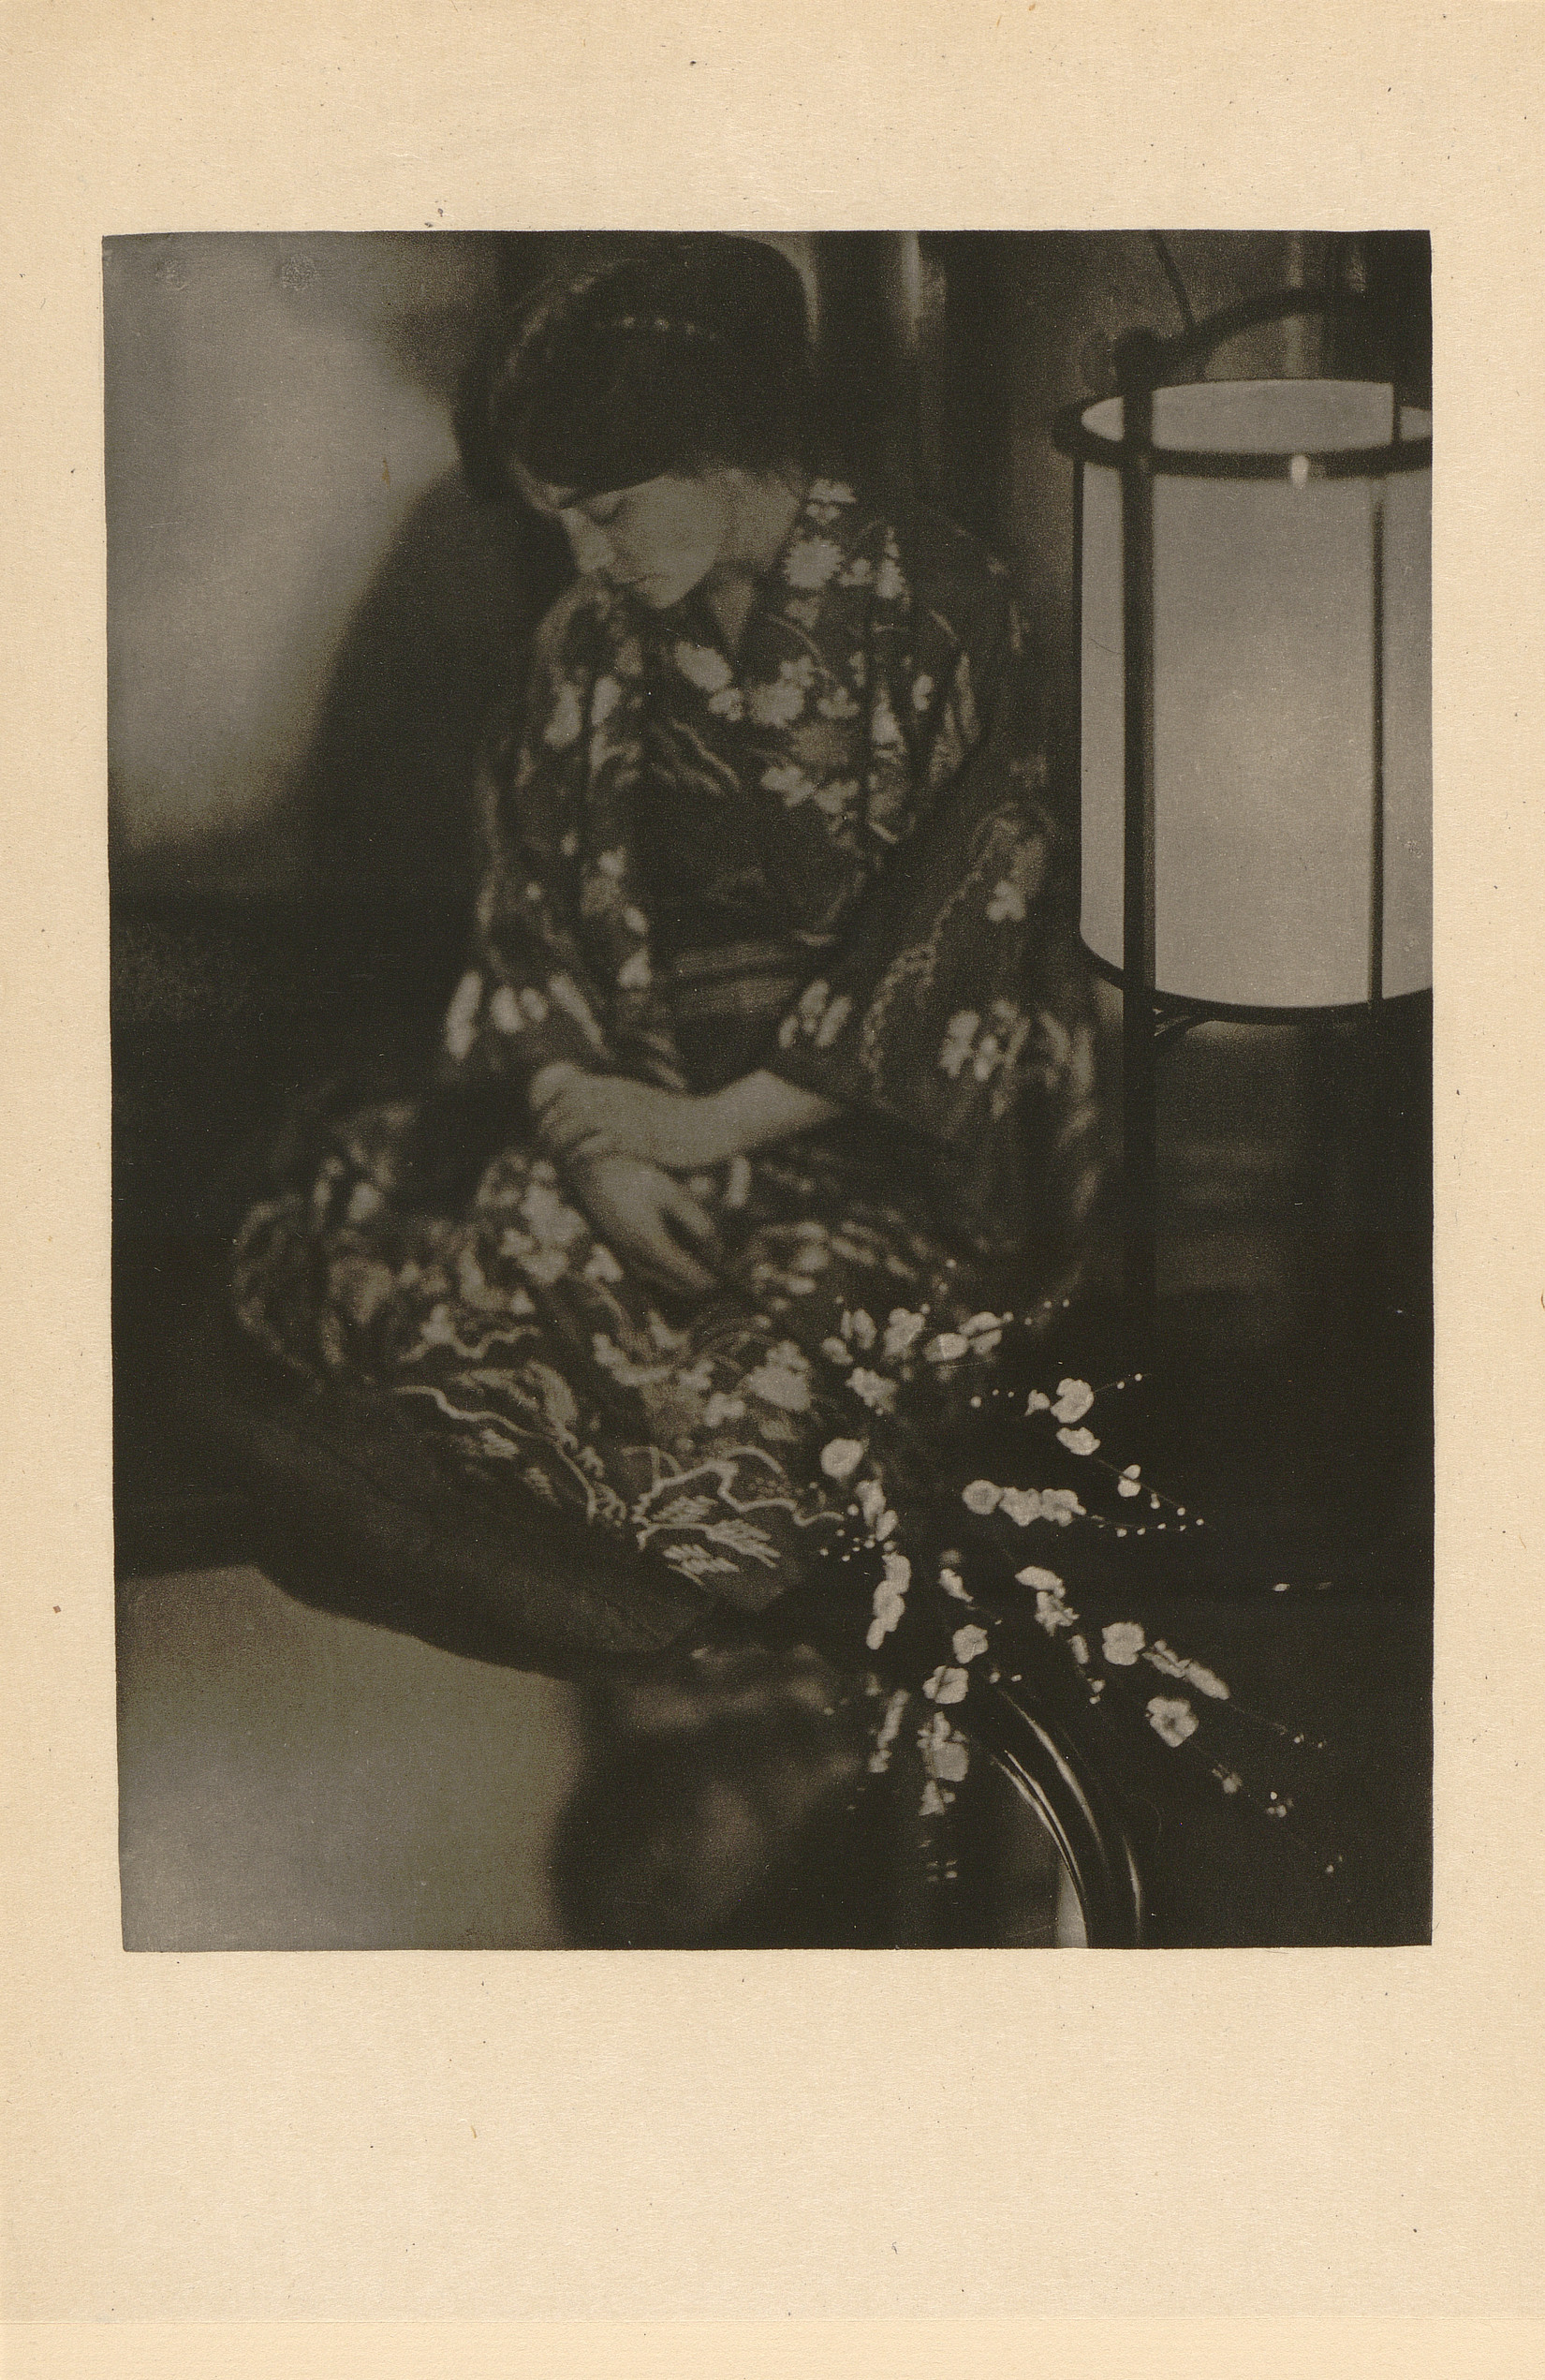 Paul B. Haviland :: The Japanese Lantern. Published in Camera Work: A Photographic Quarterly, nº 39, 1912. | Brown University